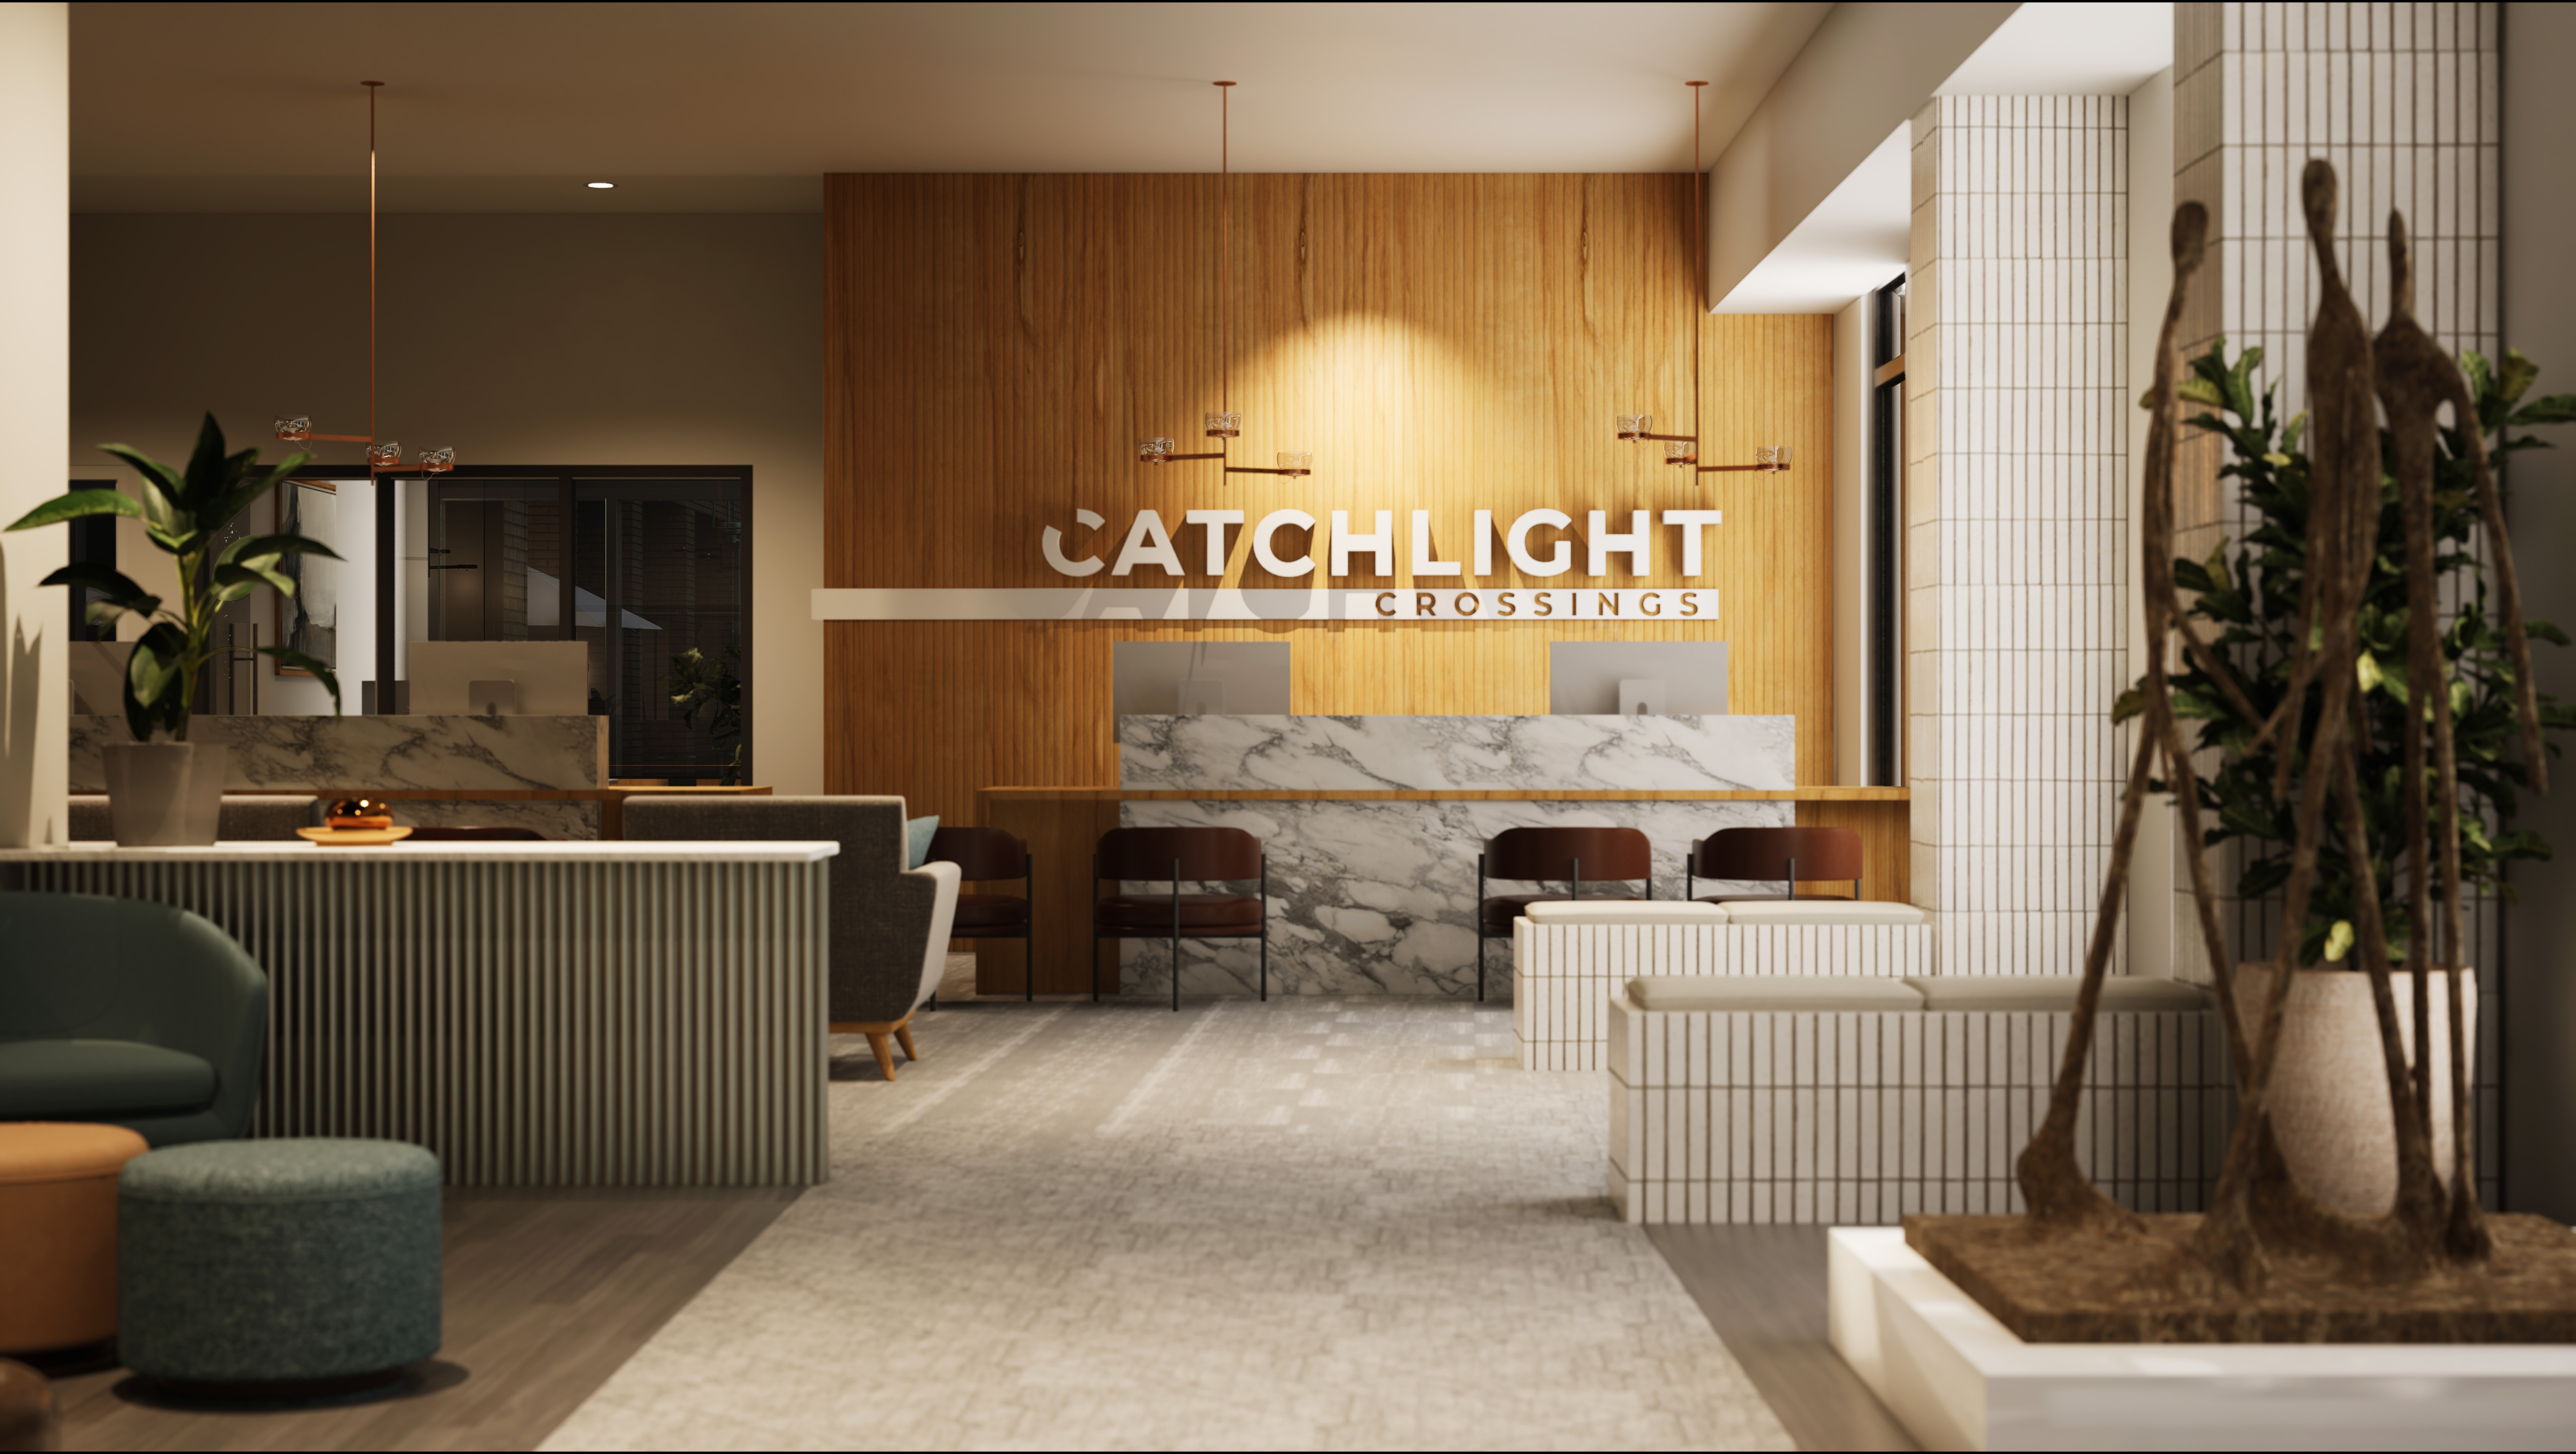 Catchlight Crossings Sets New Standard for Affordable Housing Communities 